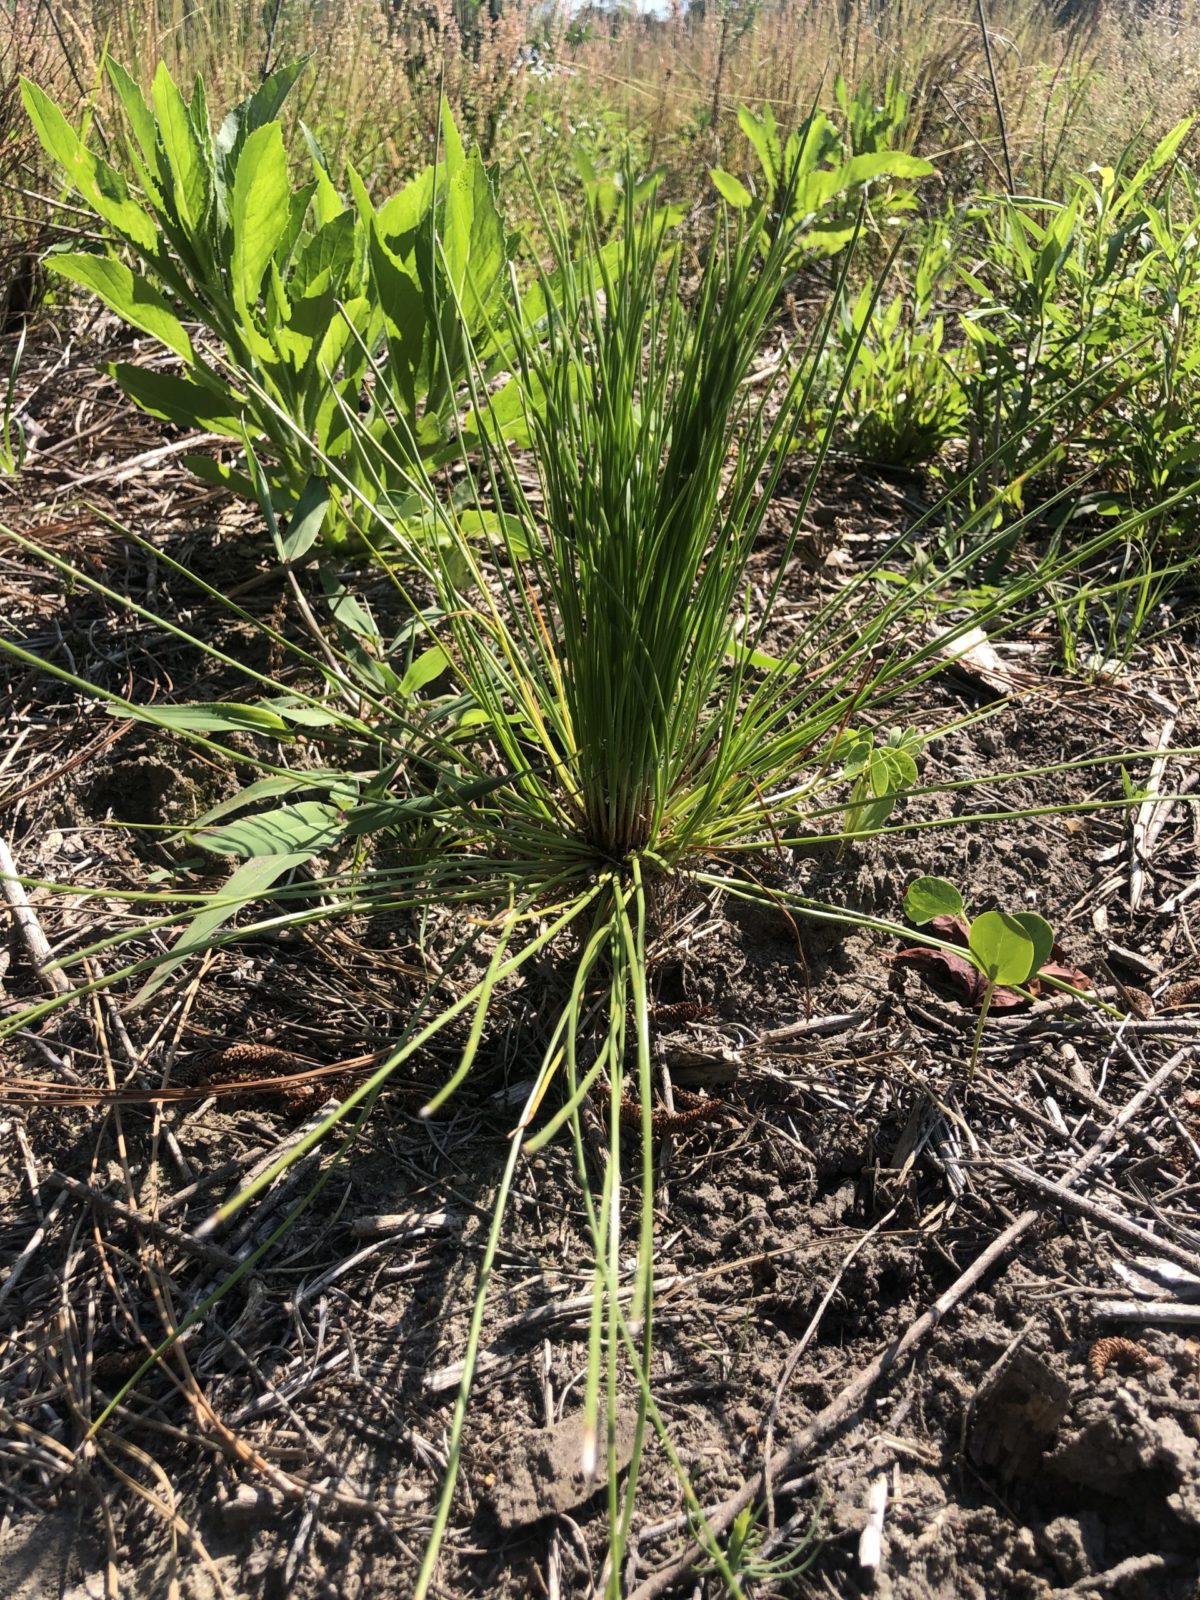 Selective herbicides during site prep maintain native grass and forb diversity in longleaf planting projects. Photo by Lisa Lord.